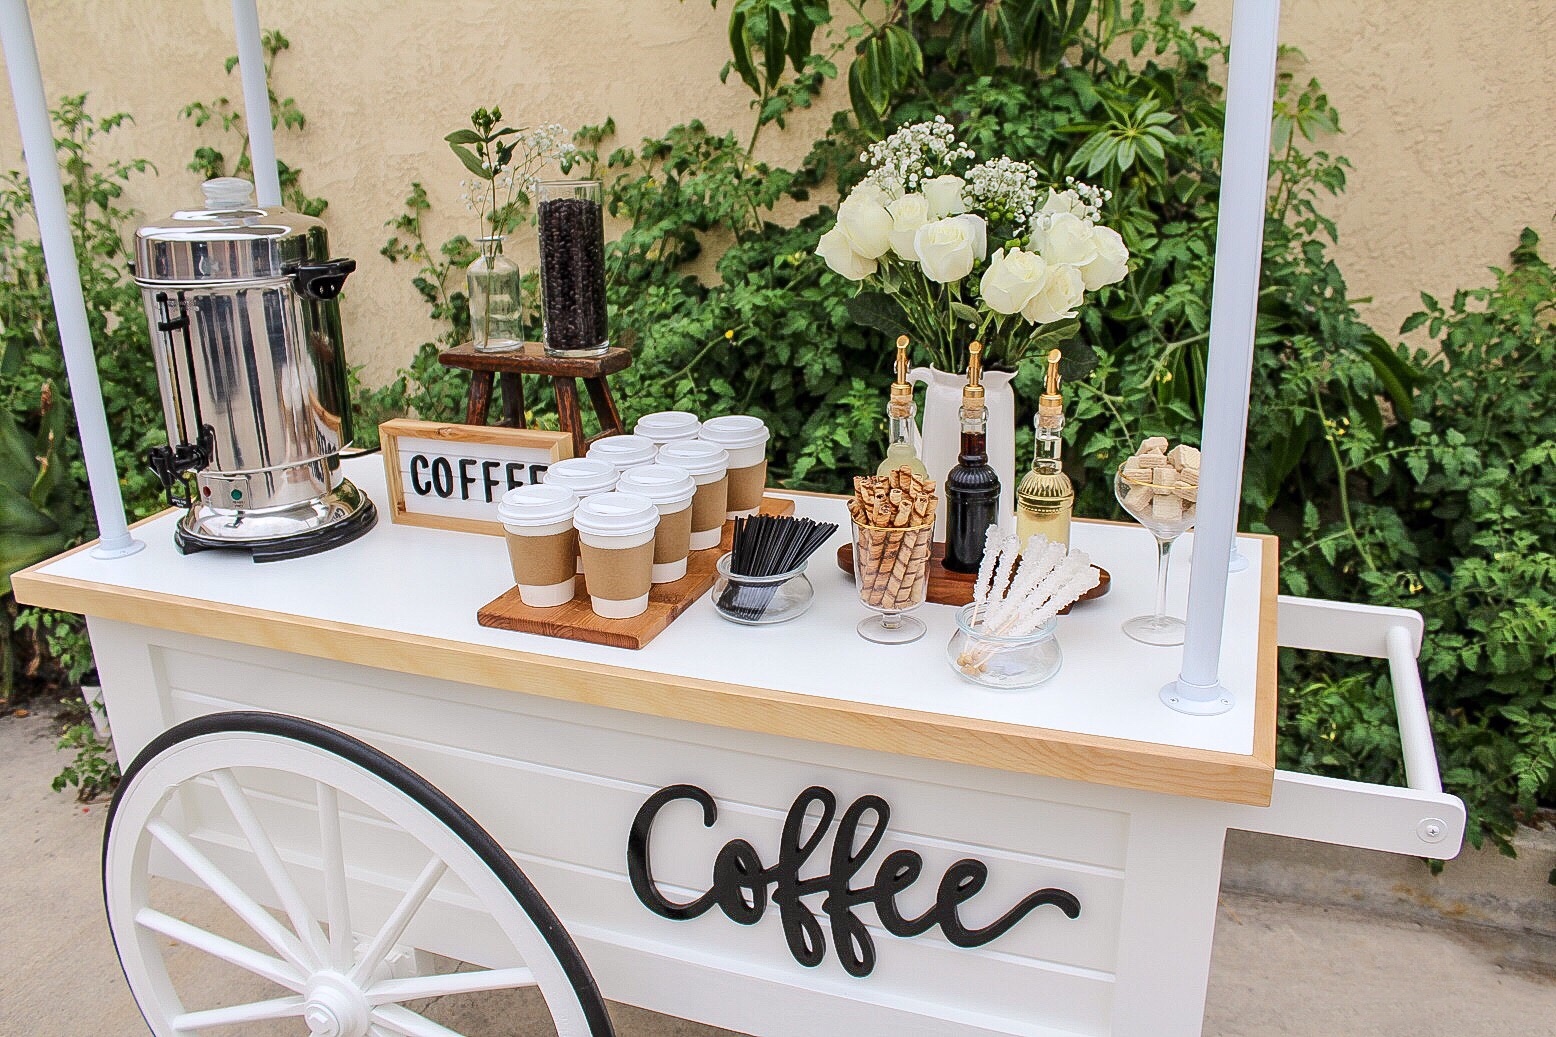 Coffee Cart Services - The Typsy Gypsy Bar - Mobile Coffee Cart SoCal